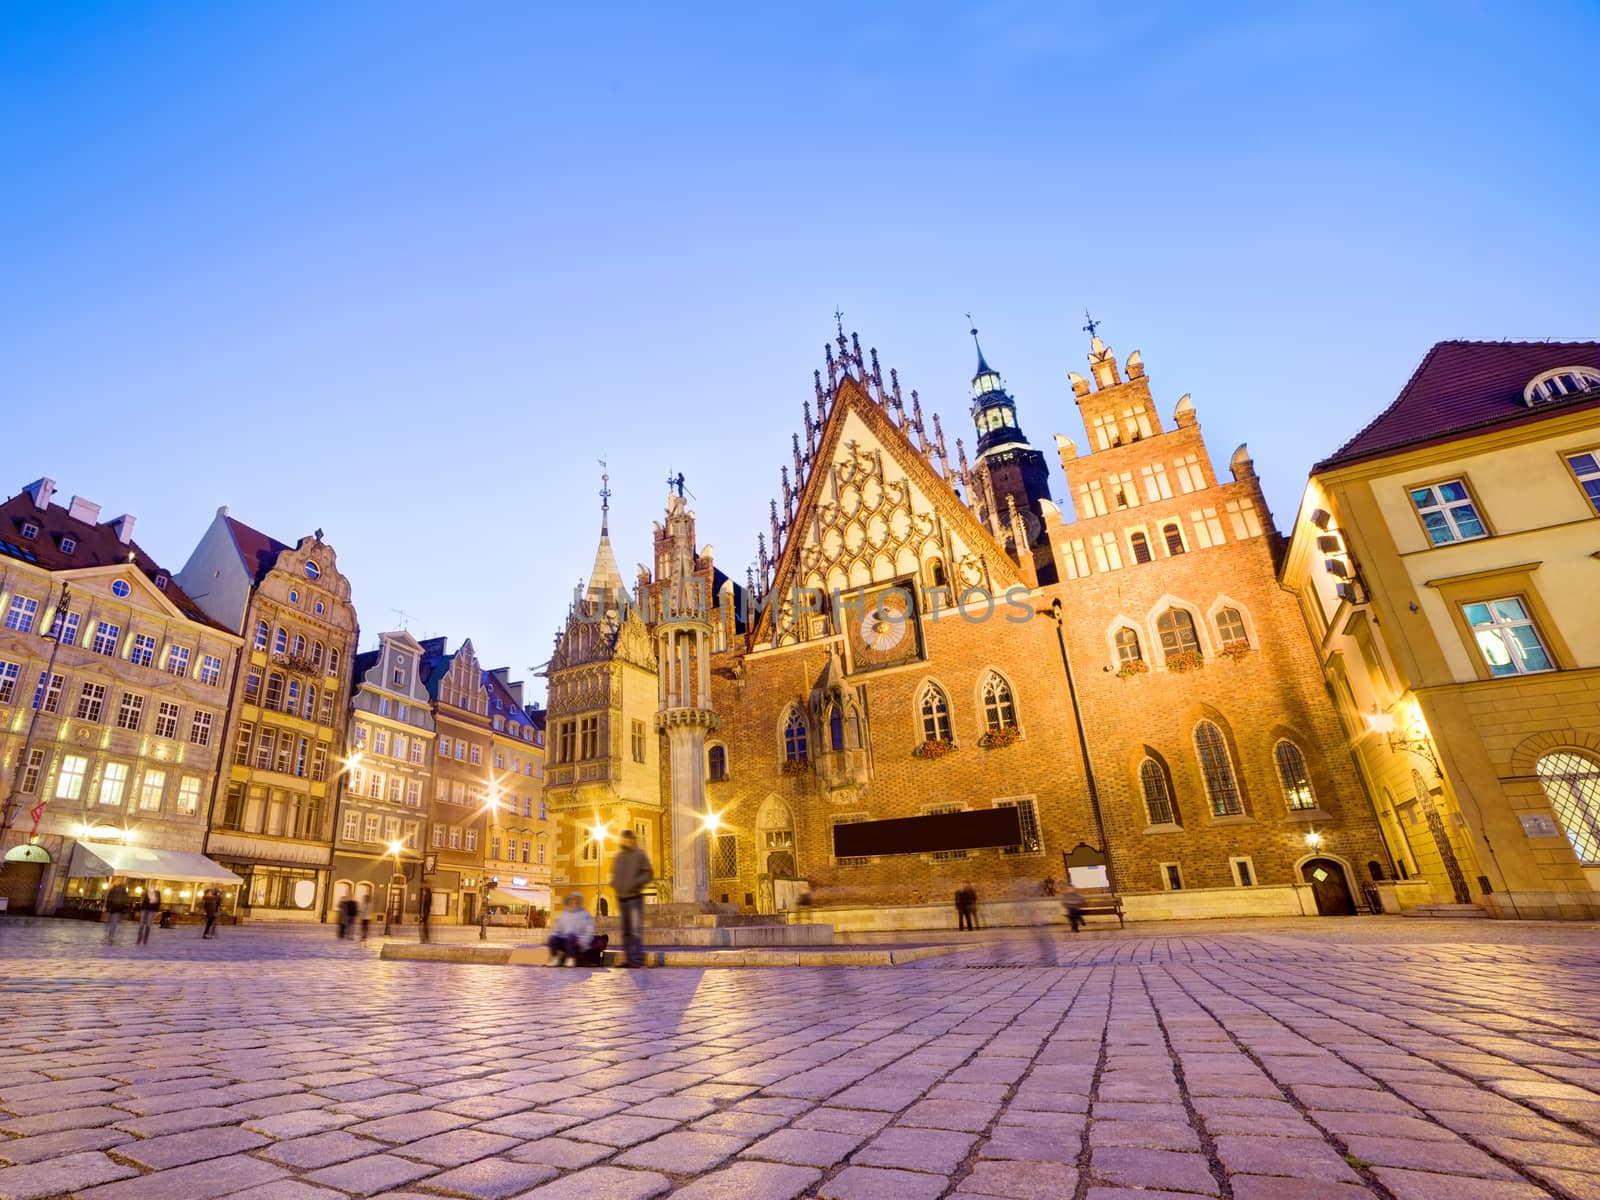 Wroclaw, Poland. The Town Hall on market square at night by photocreo